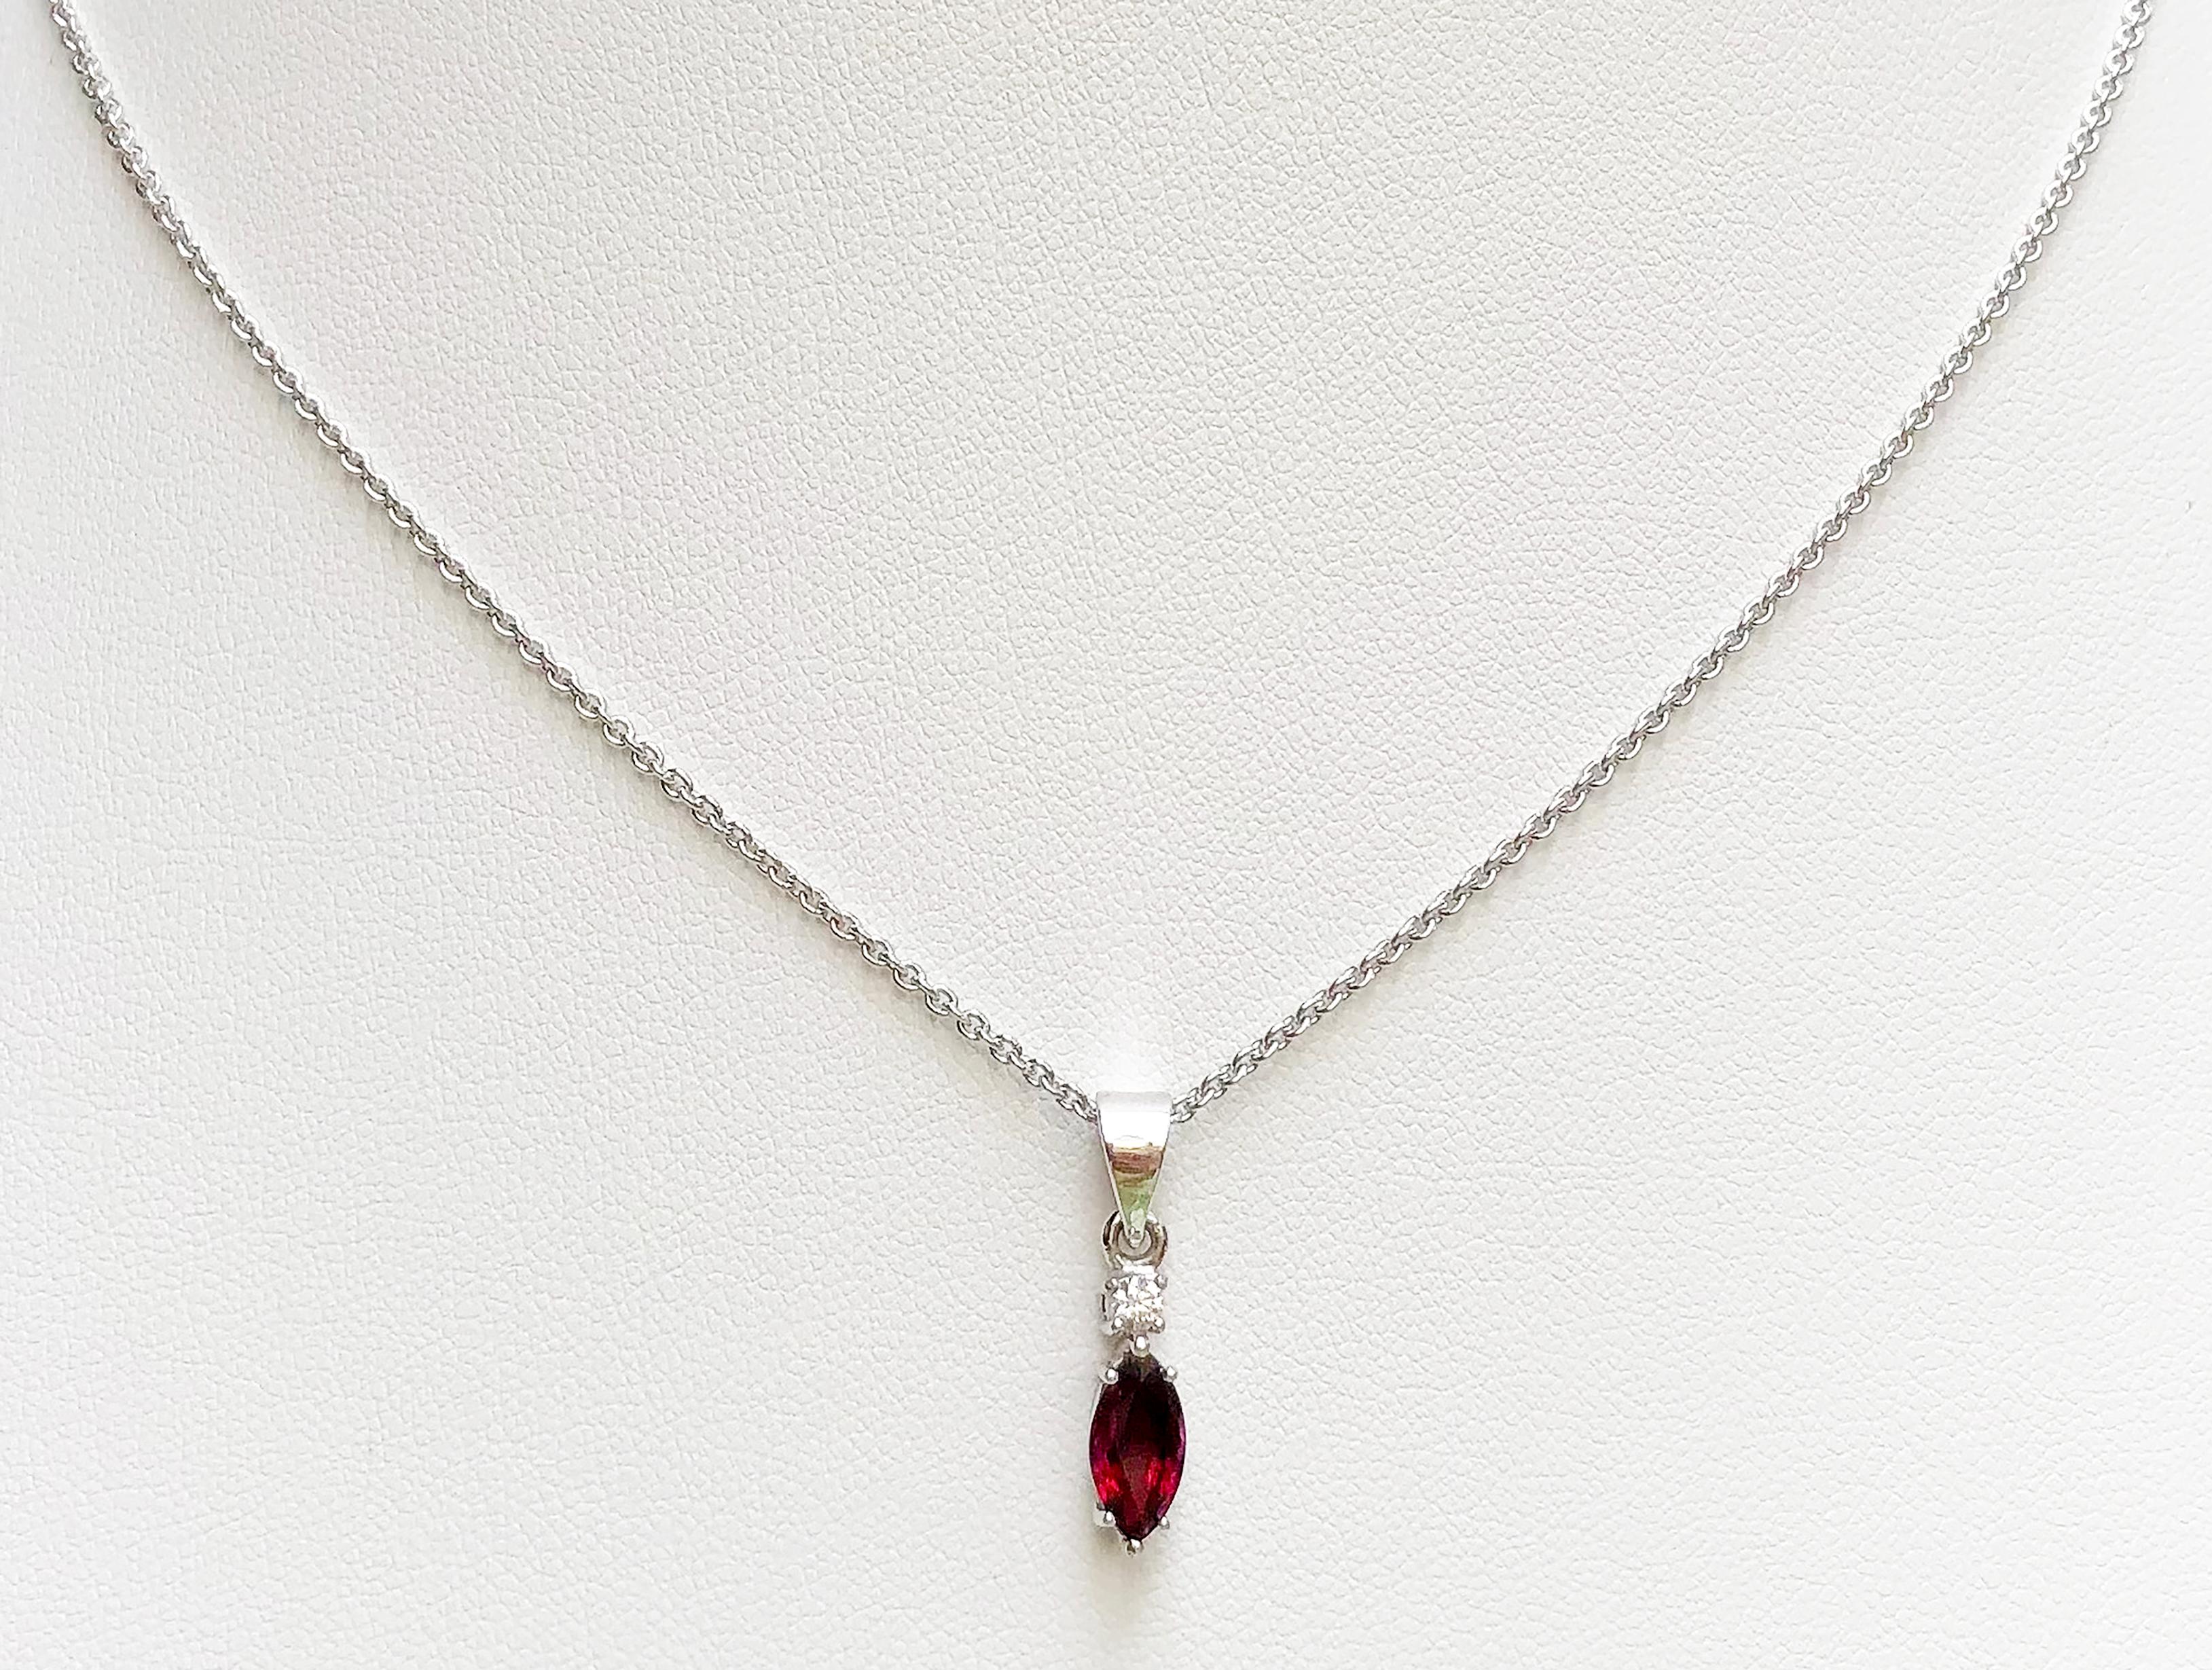 Ruby 1.03 carats with Diamond 0.06 carat Pendant set in 18 Karat White Gold Settings 
(chain not included)

Width:  0.4 cm 
Length: 2.0 cm
Total Weight: 1.45 grams

